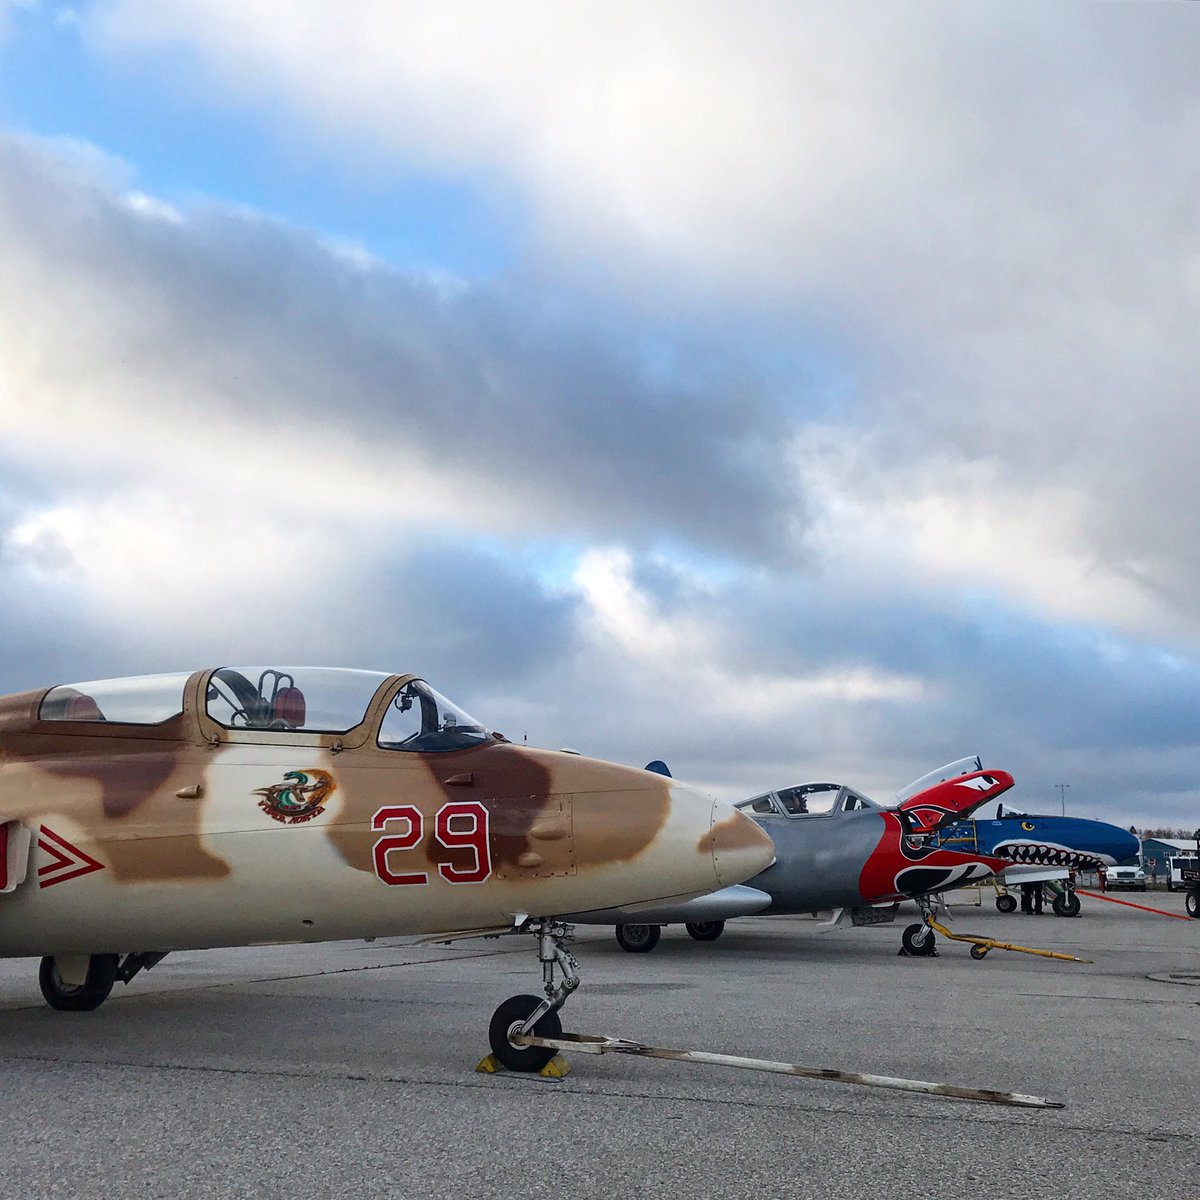 We’re preparing for our #RemembanceDay flyover! We’ll be taking off at 10:30 from @FlyYKF and will be in the air for just over half an hour. We’ll be flying a jet formation over Waterloo Region, Wellington County & Perth County, and our Harvard will be over Kitchener & Guelph.